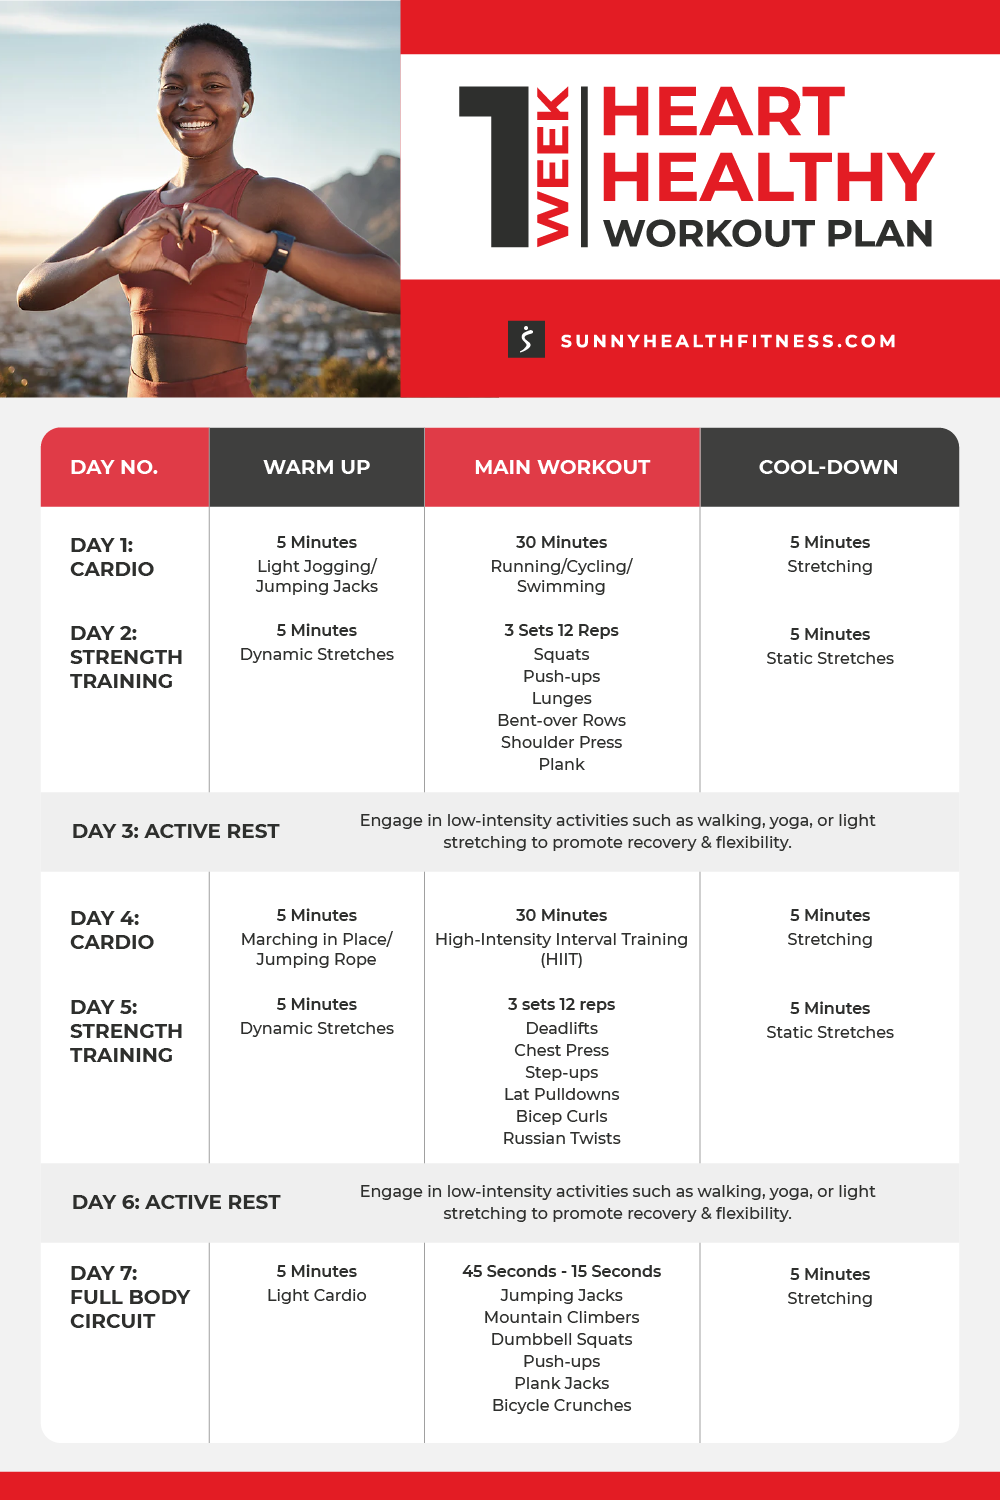 Heart Healthy Exercise Programs and Effective Workouts Infographic